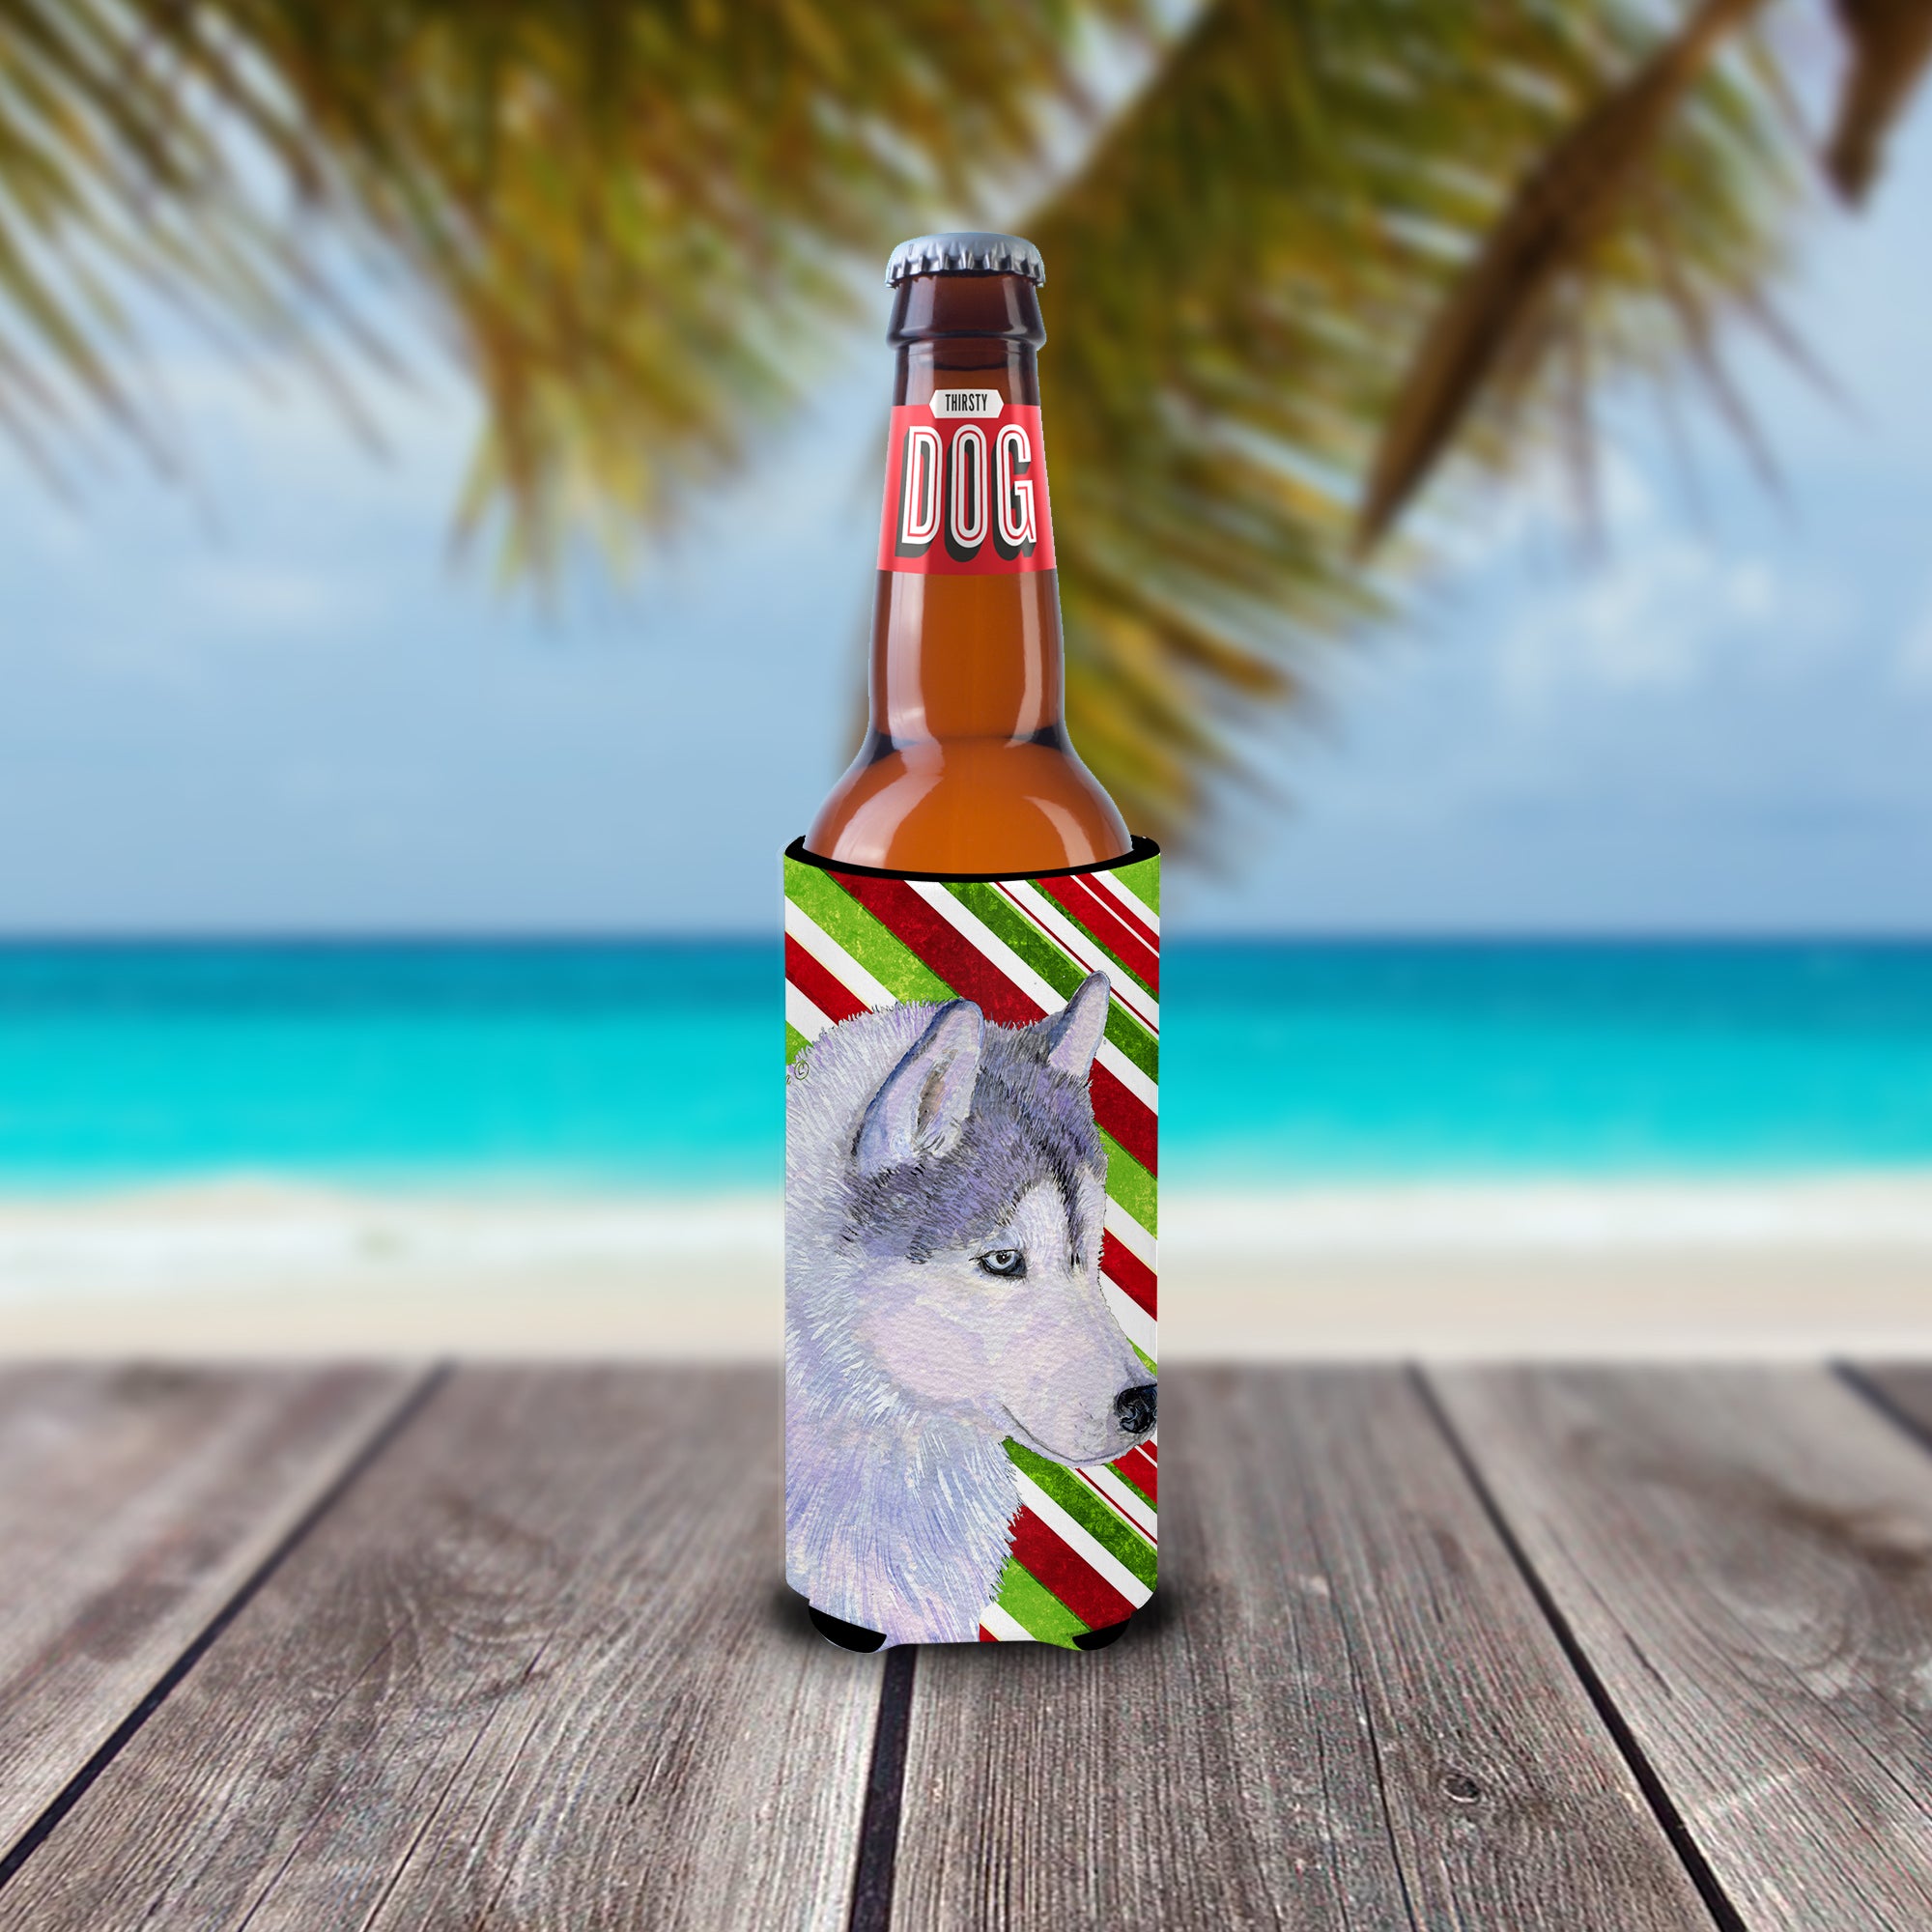 Siberian Husky Candy Cane Holiday Christmas Ultra Beverage Insulators for slim cans SS4533MUK.